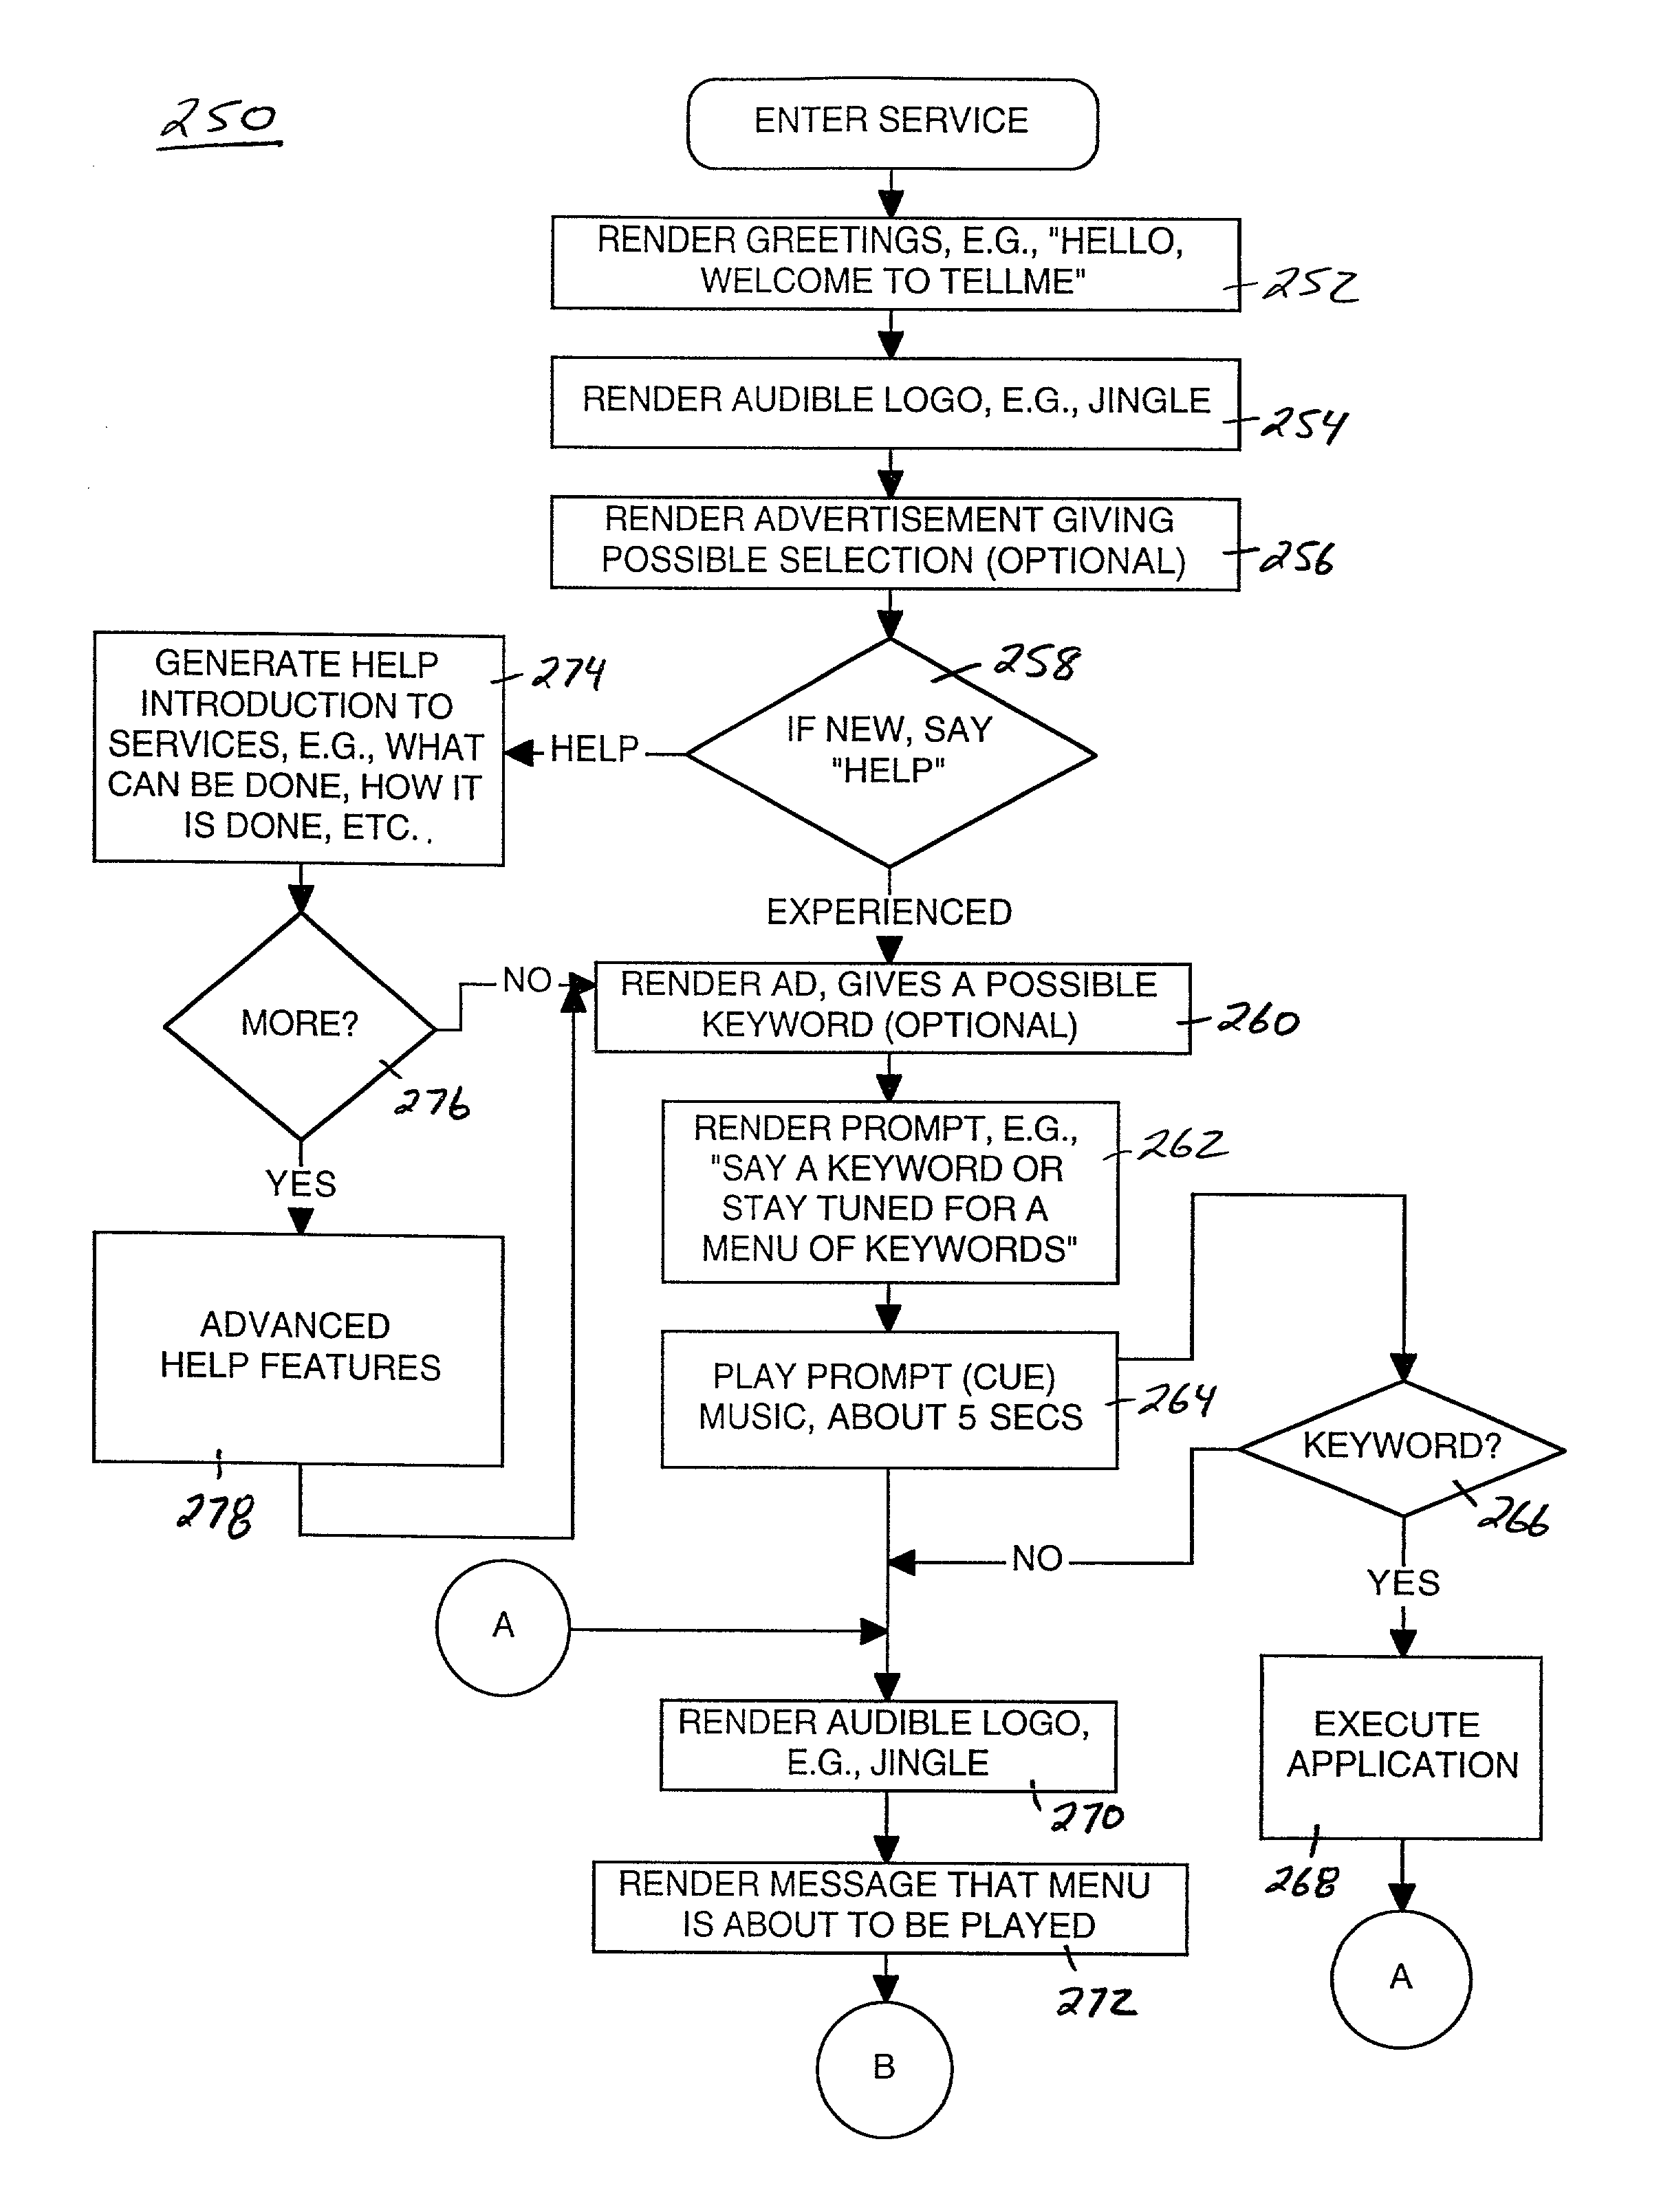 Providing menu and other services for an information processing system using a telephone or other audio interface